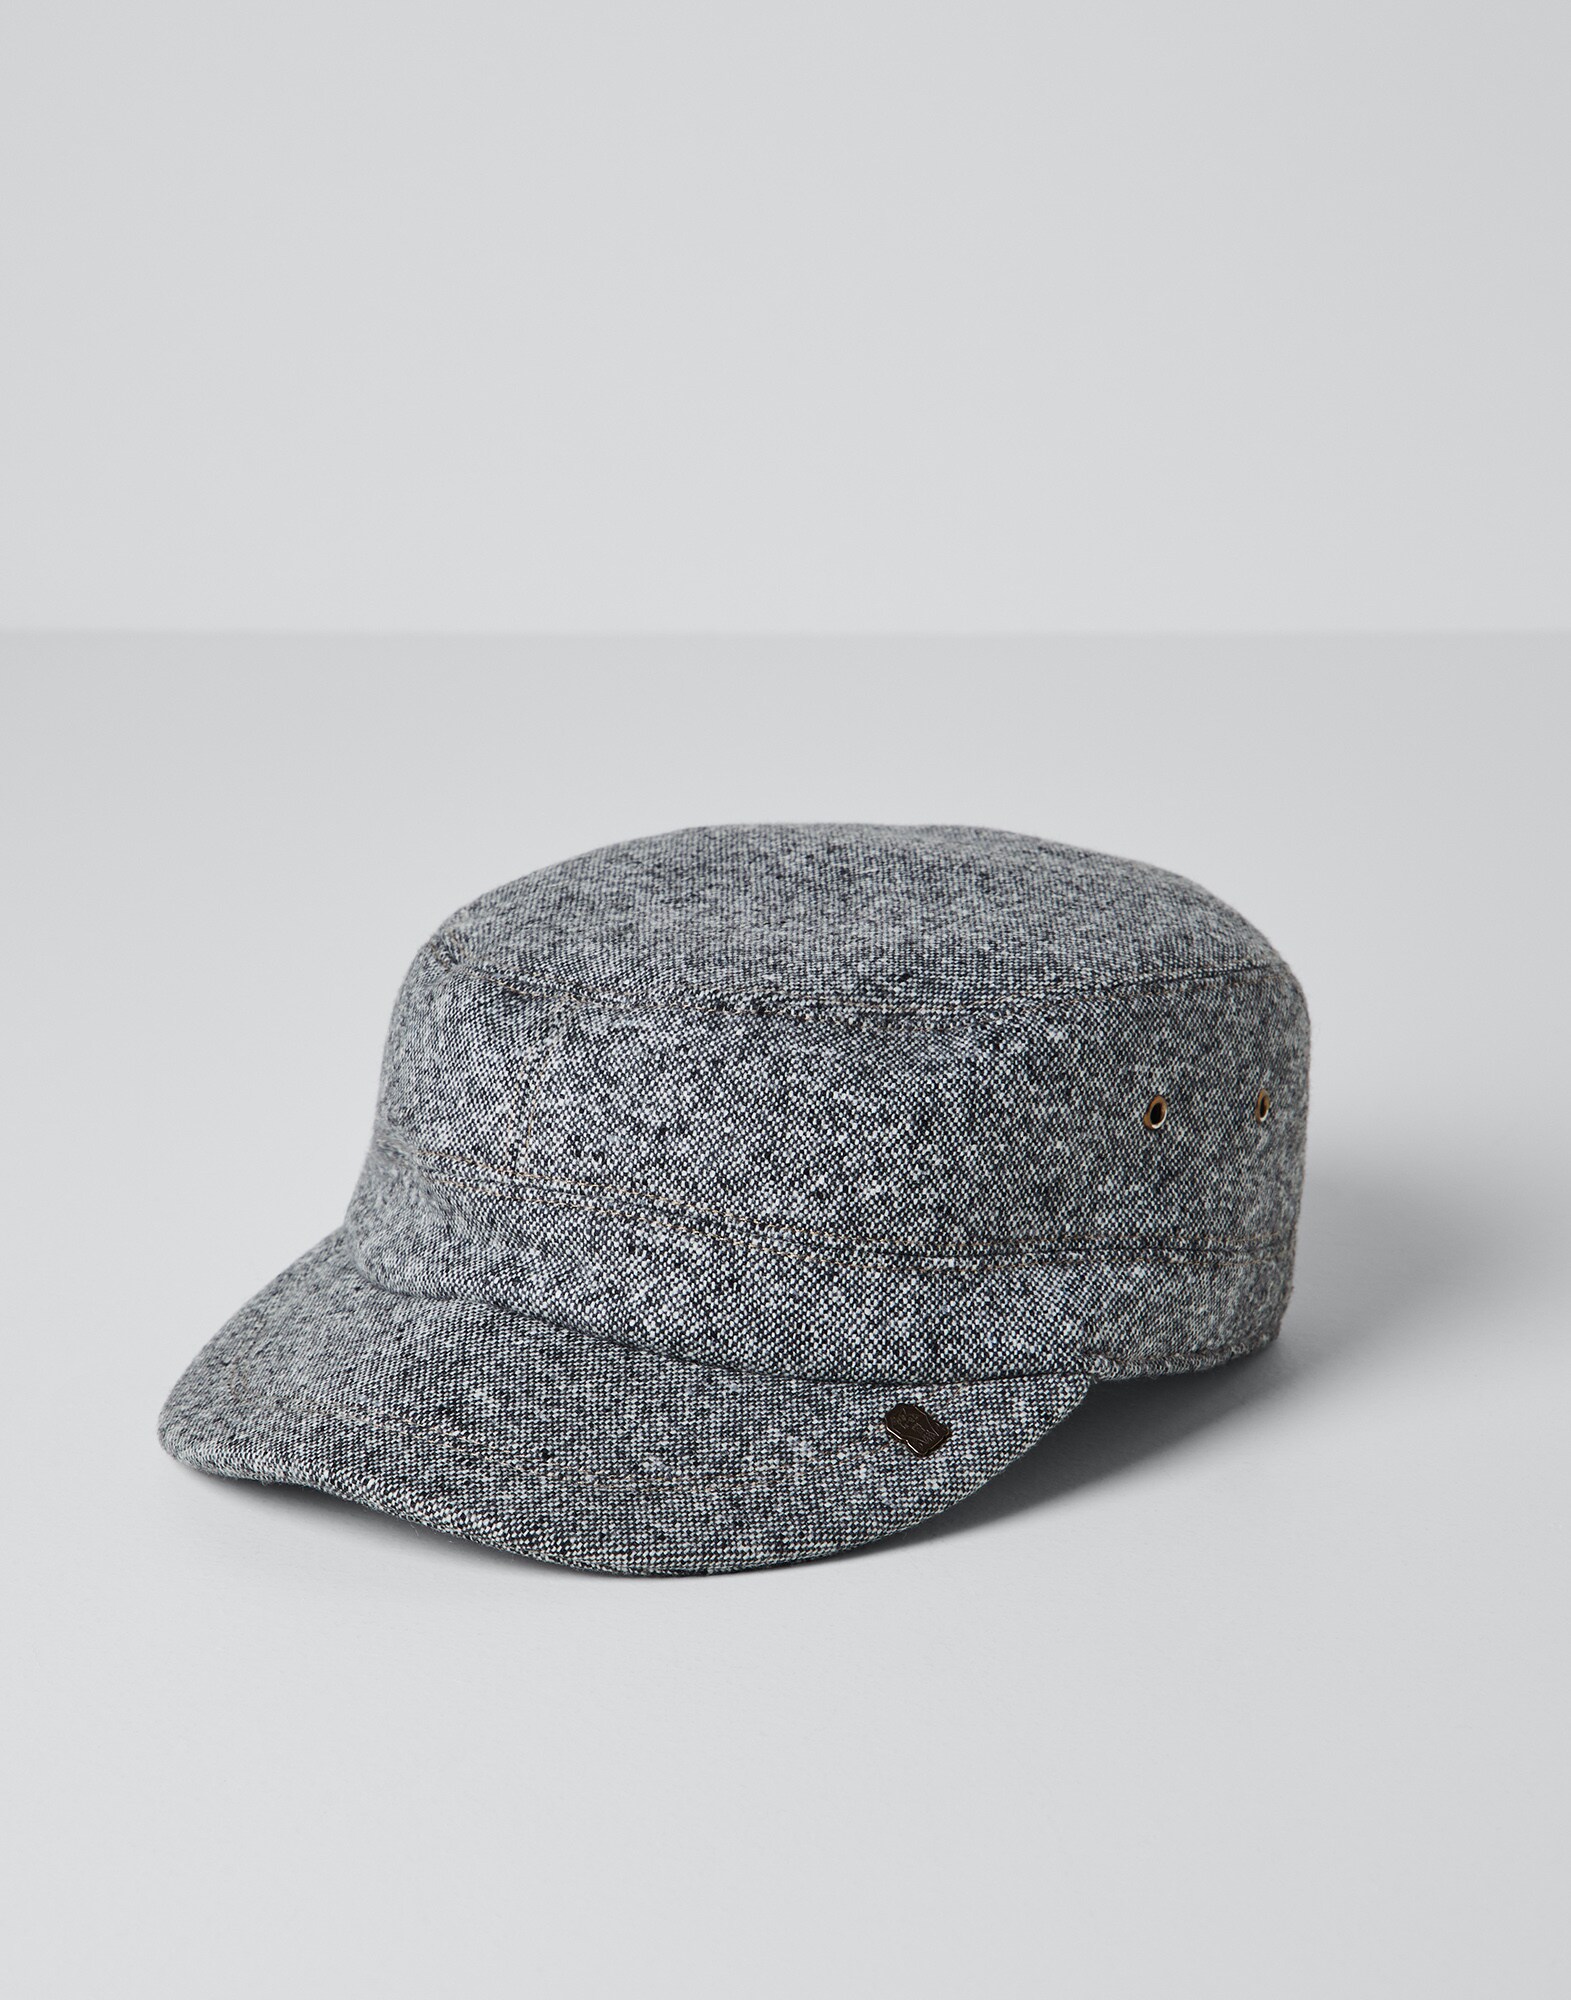 Wool and cashmere tweed cap